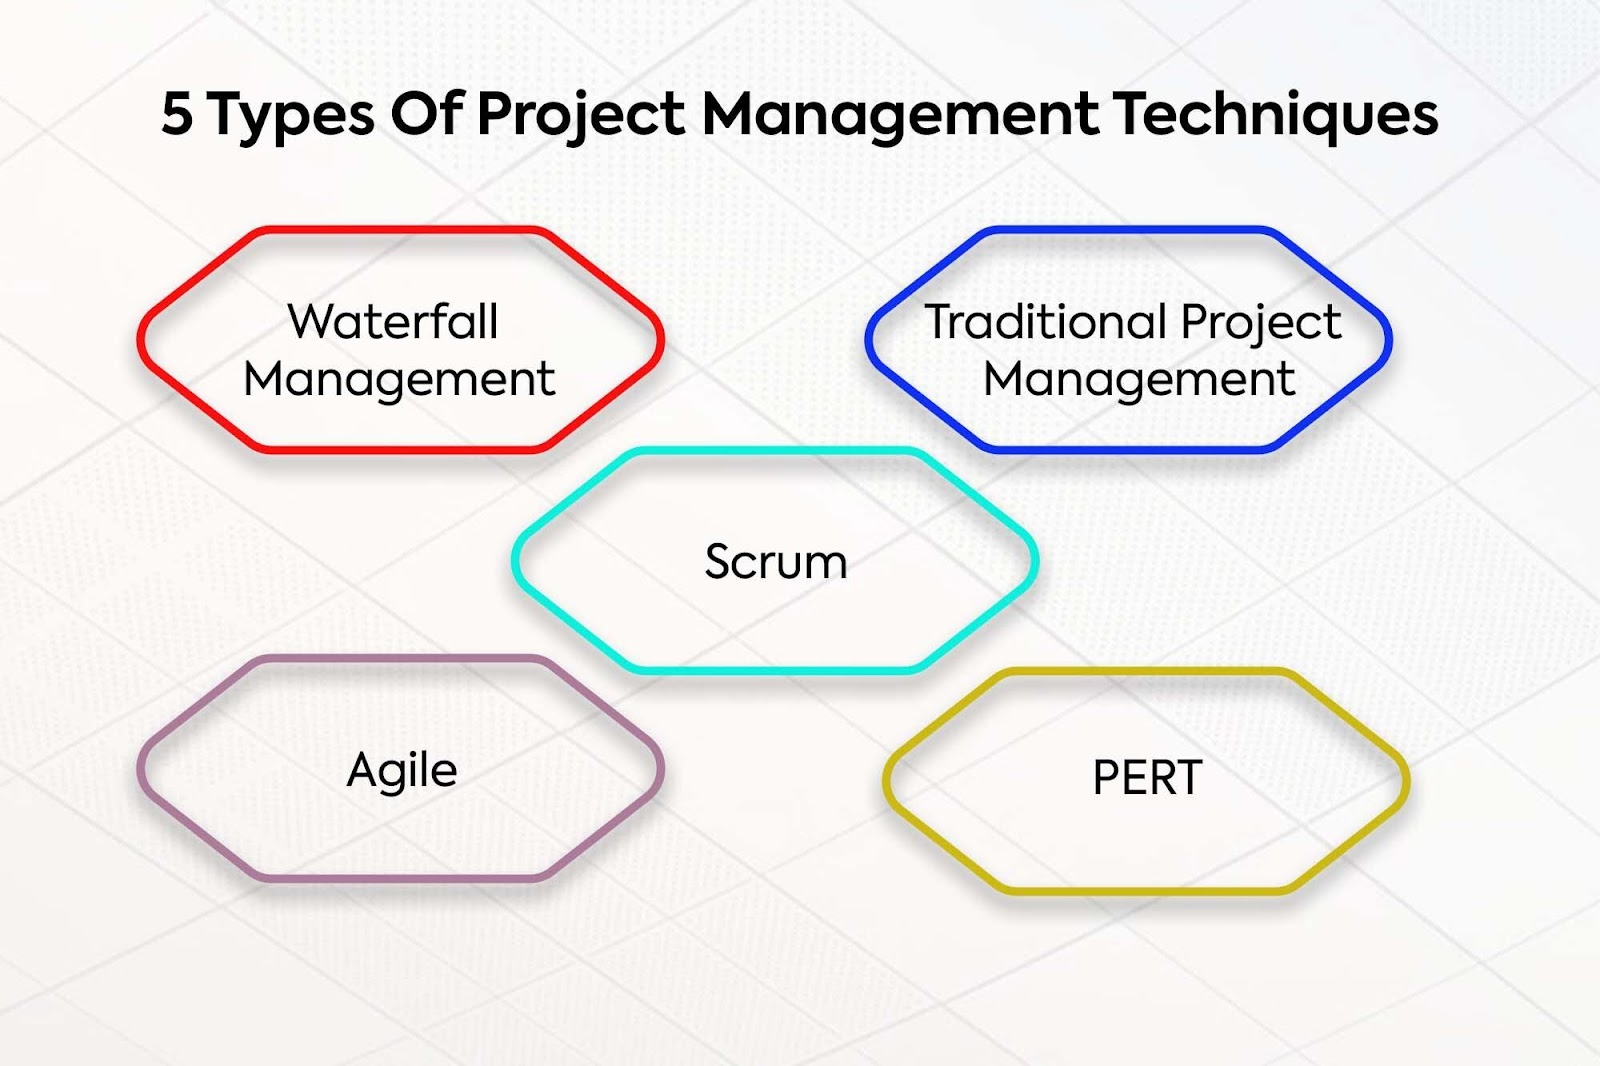 Types of Project Management techniques